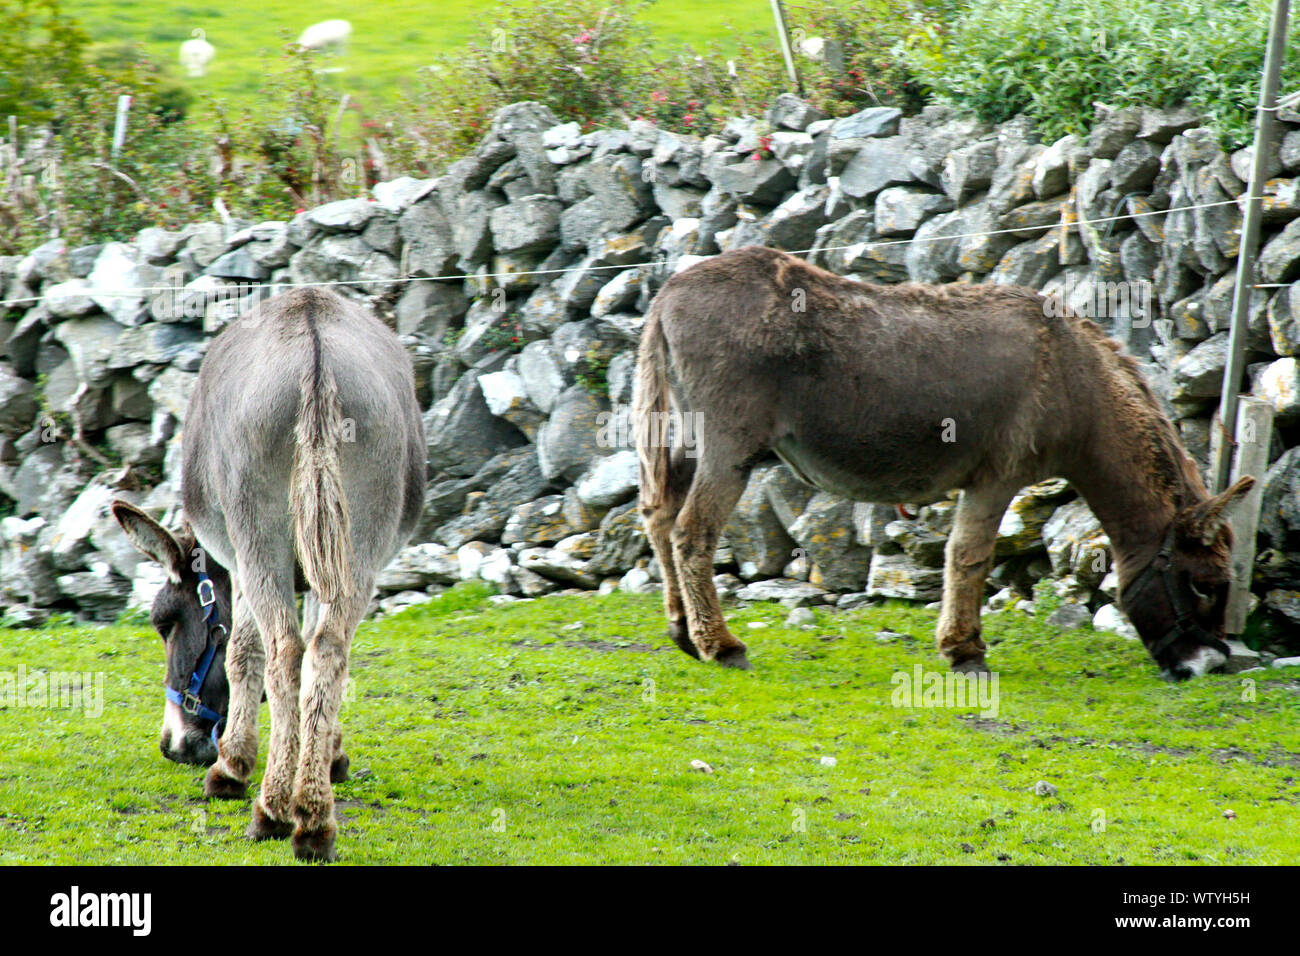 Two Donkeys Grazing In A Green Rural Environment Stock Photo